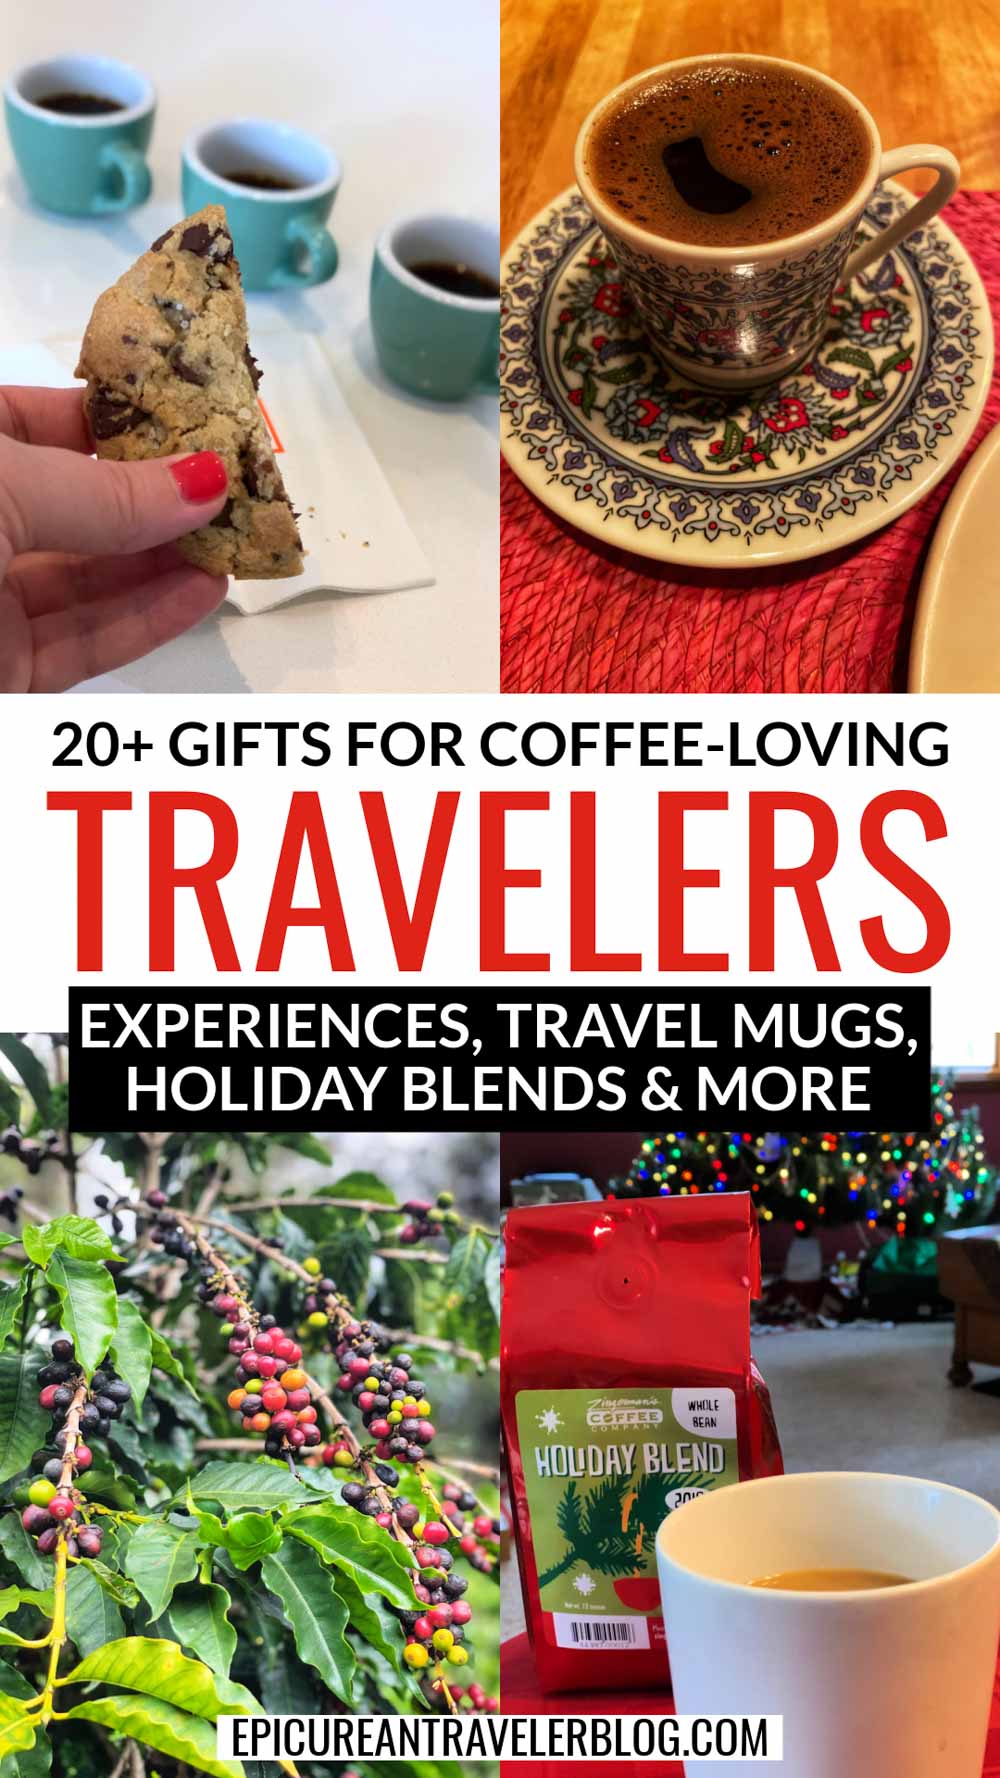 20+ gifts for coffee-loving travelers including experiences, travel mugs, holiday blends, and more!